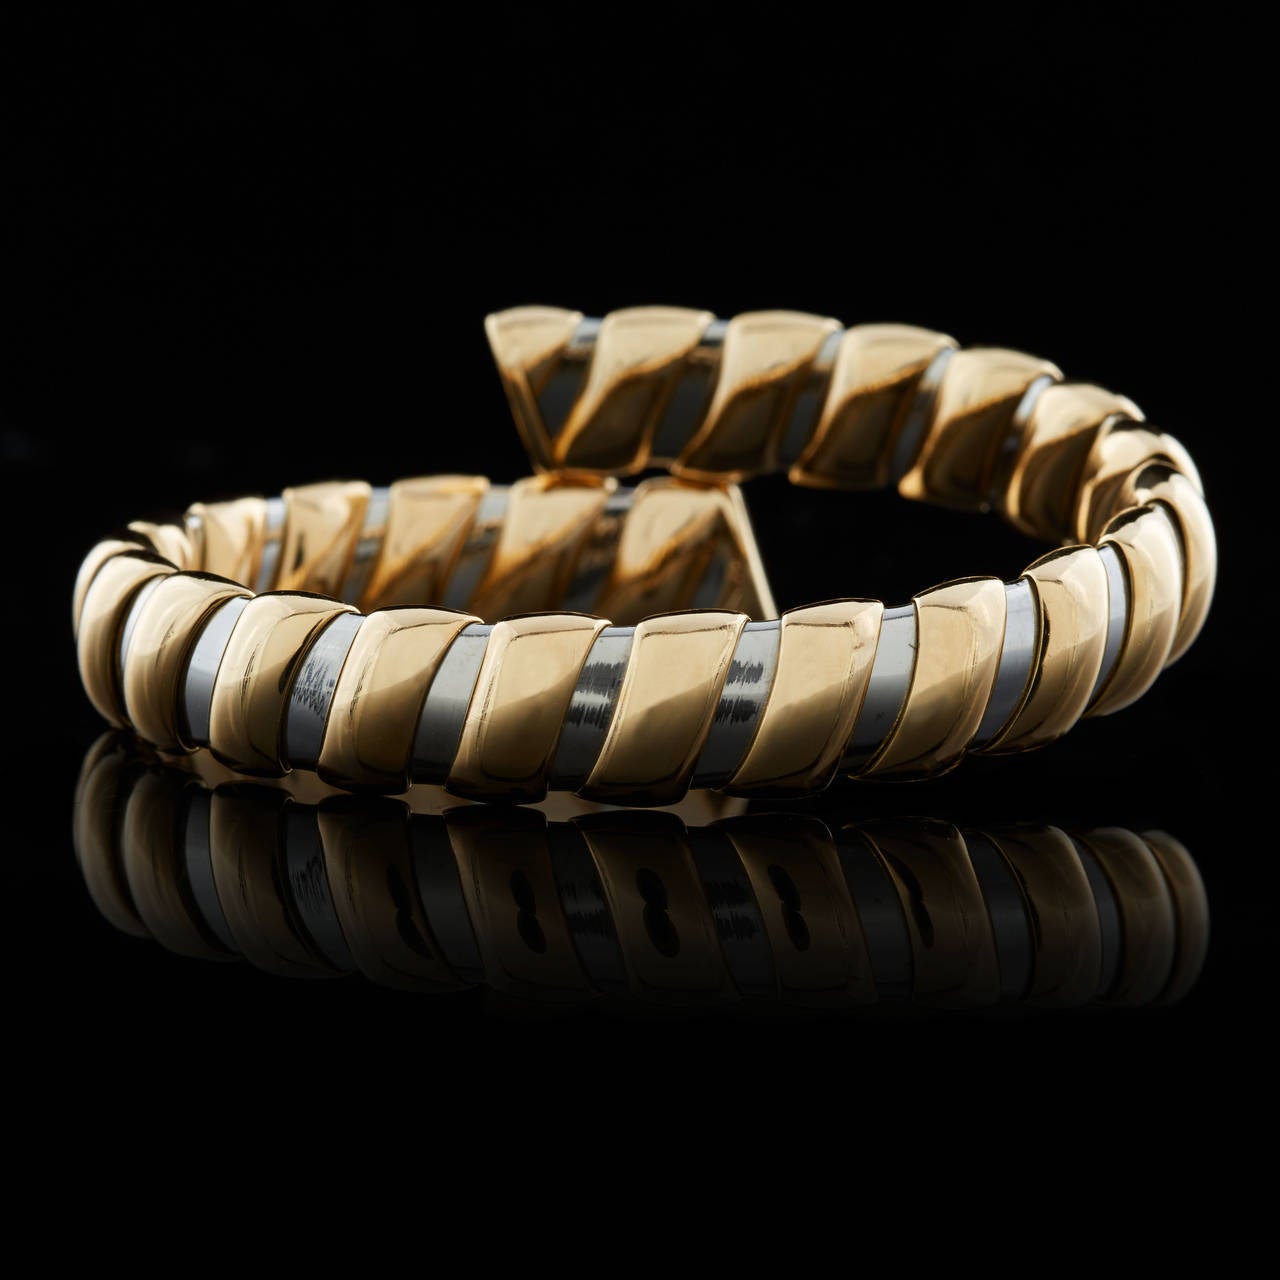 Bulgari 18Kt Two-Tone Yellow and White Gold Twist Design Bangle Bracelet with a Flexible Feel. The bracelet measures 8 inches around and 10mm wide, with a weight of 43.6 grams.